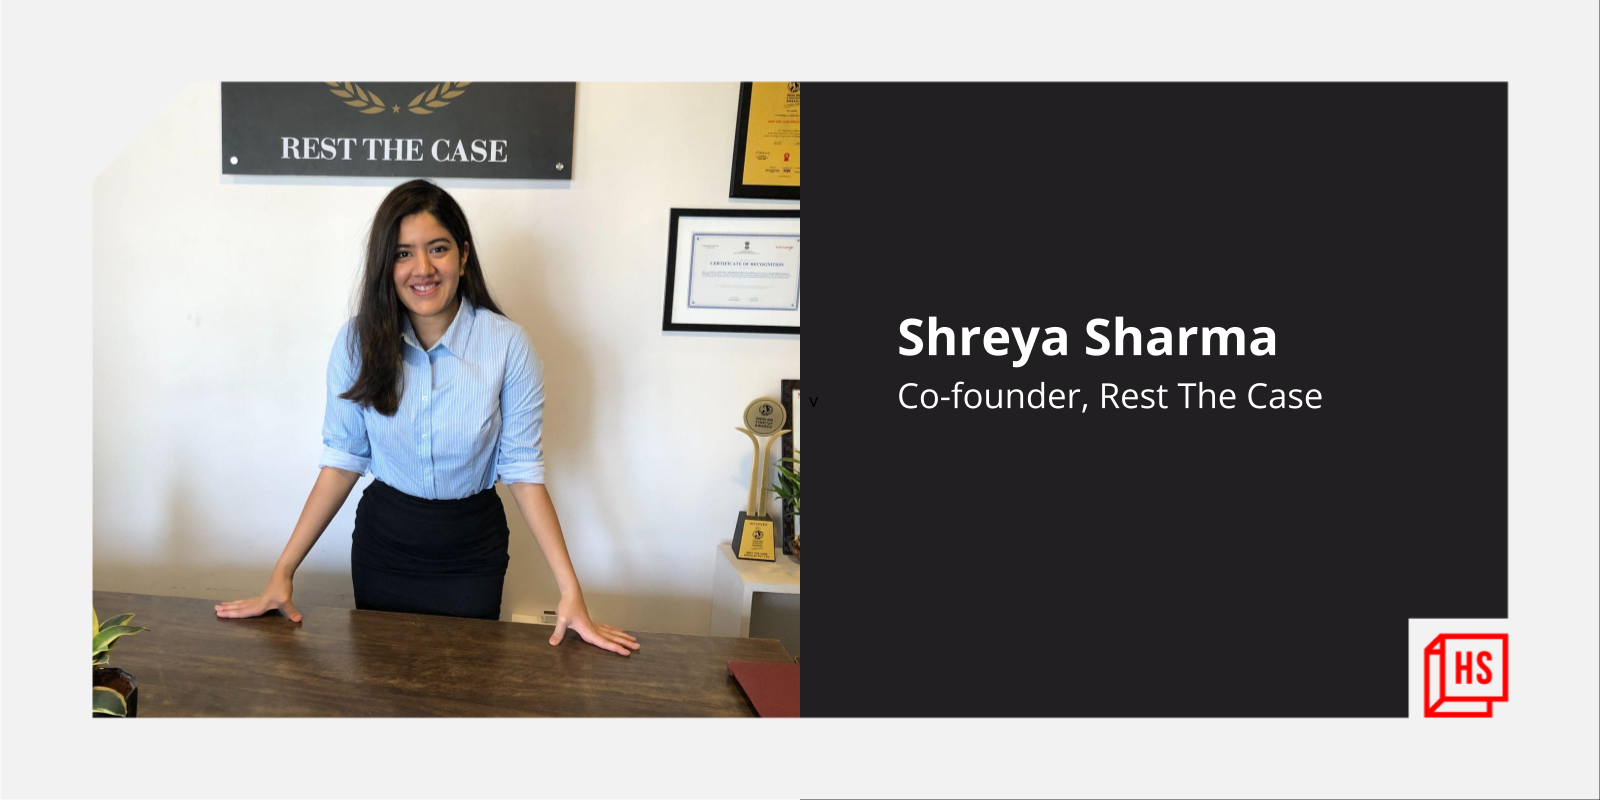 This young lawyer-entrepreneur is building a one-stop legal services platform